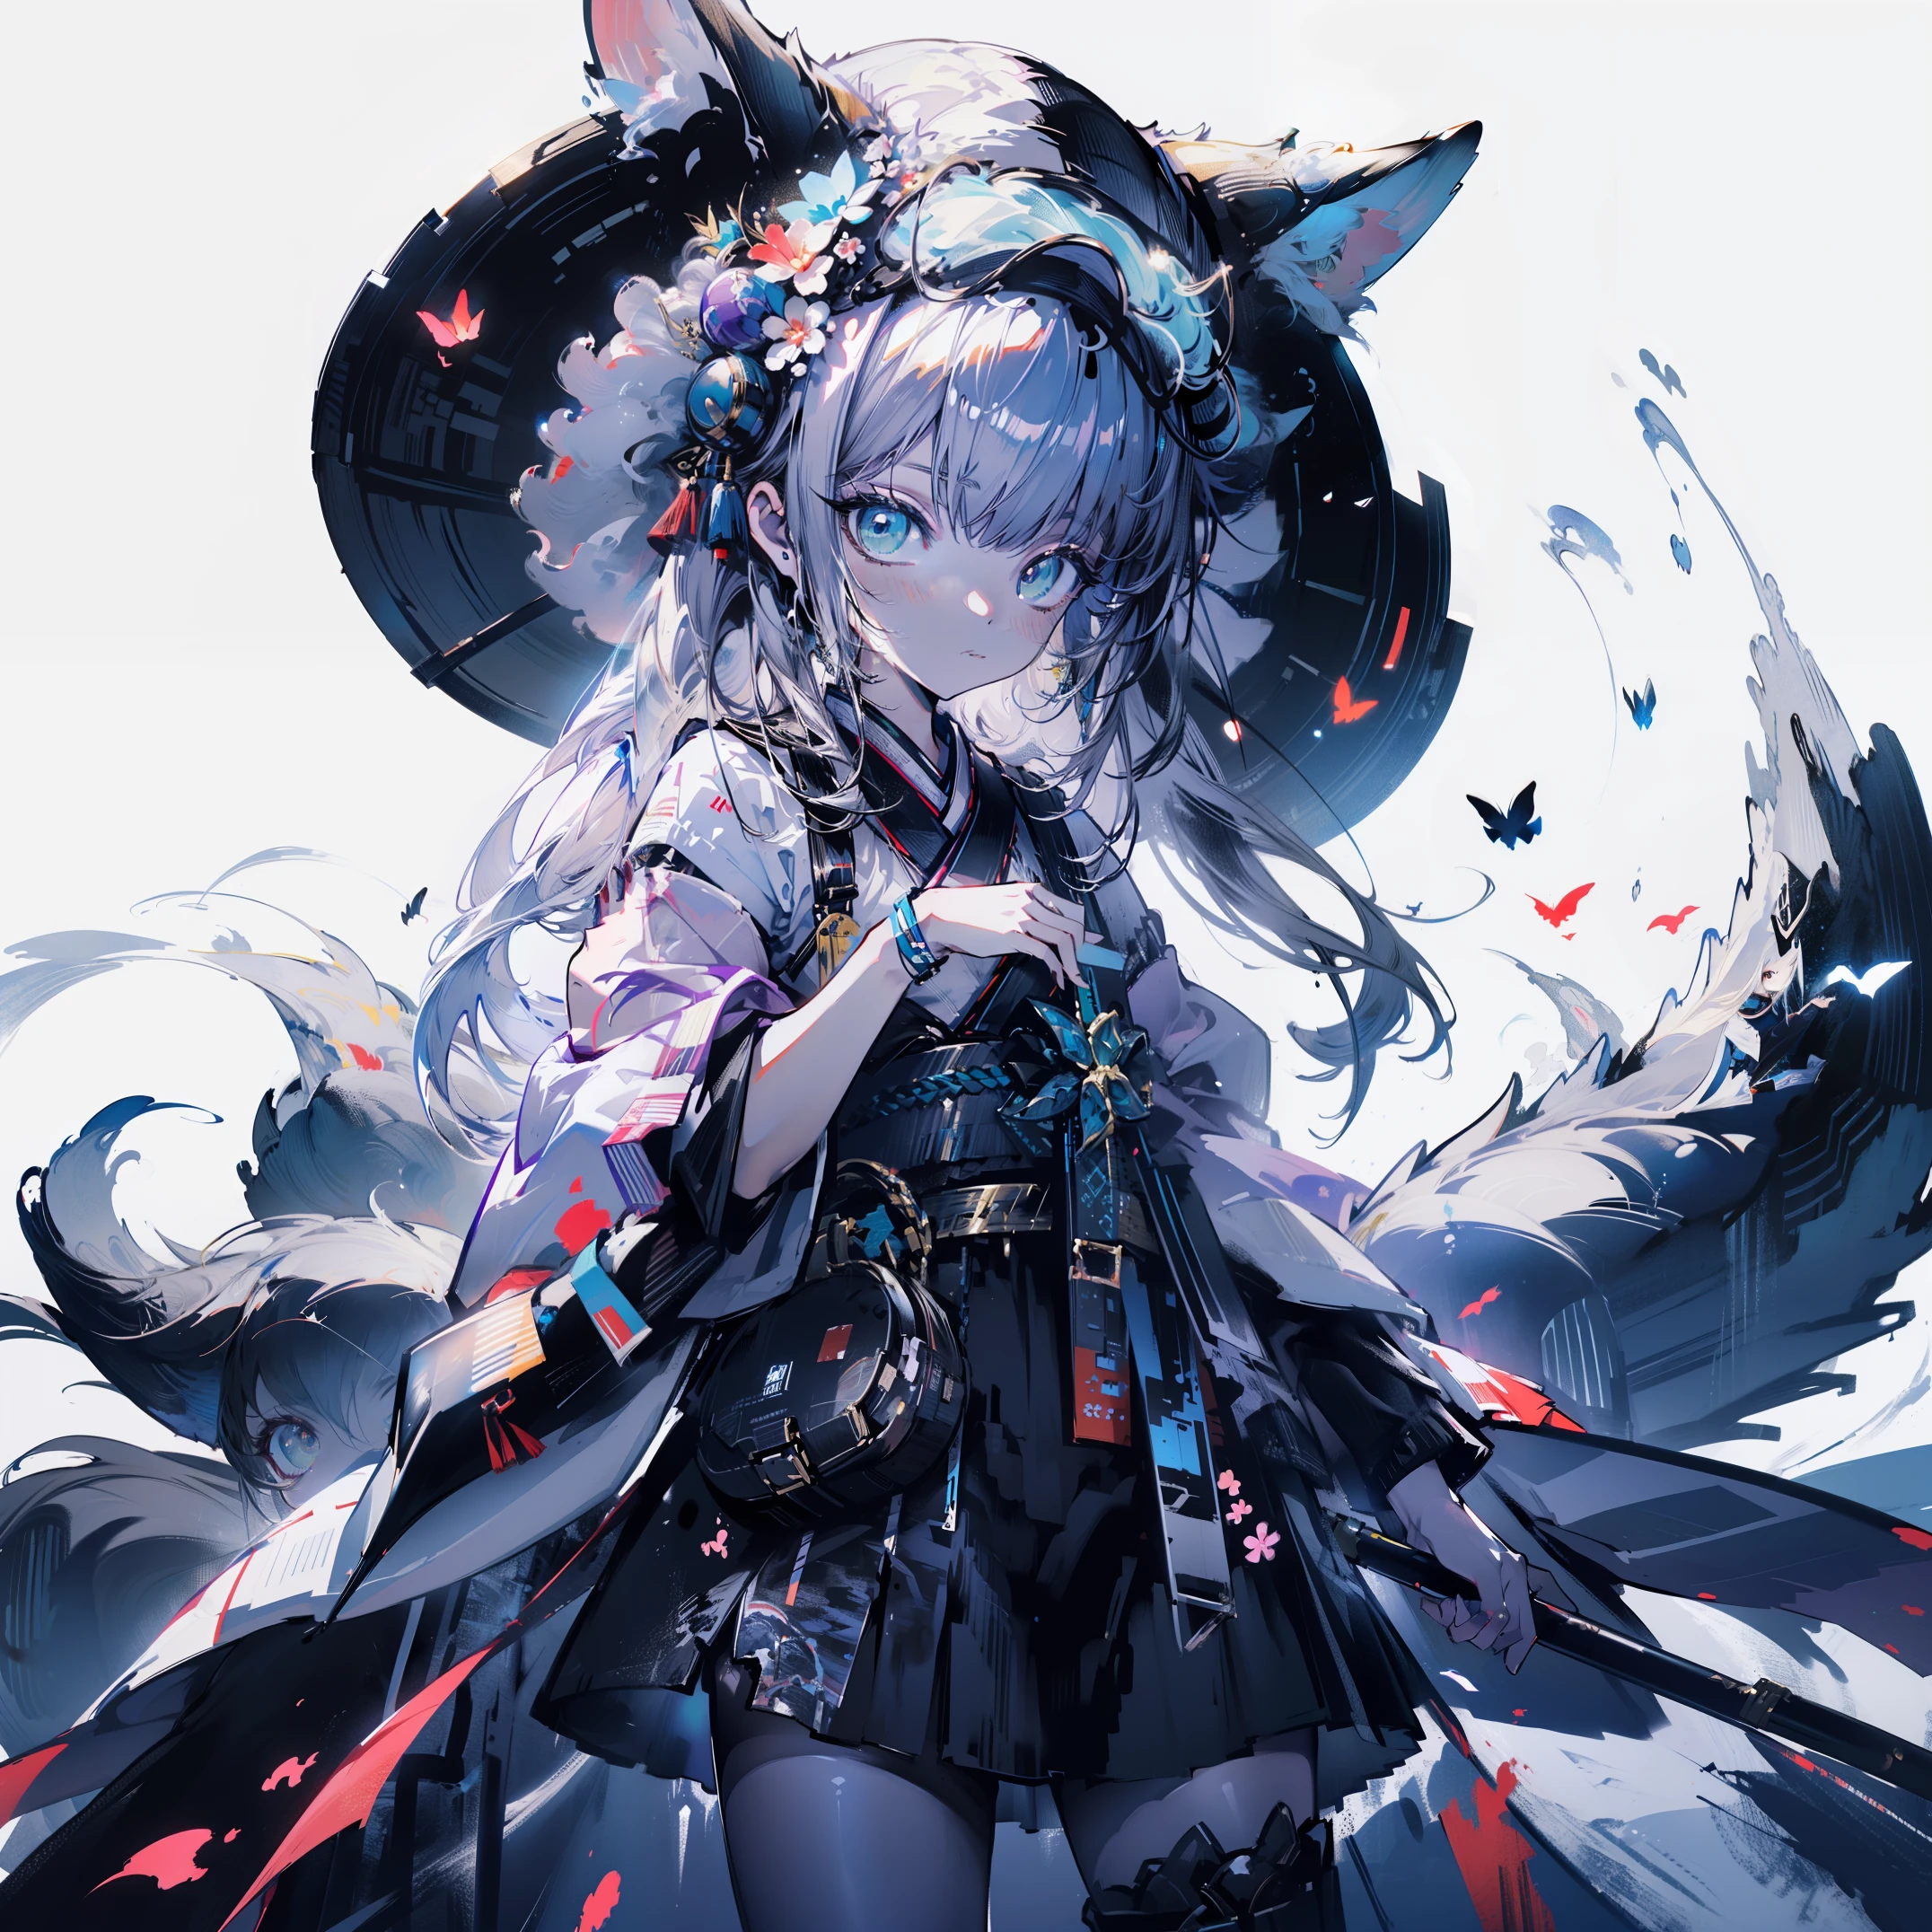 white background, blue skirt，solo woman, alone, (kneel down), (kneel down on white glass surface), (cent, small), (white background), (witch hat), curly, looking at the viewer, with panoramic view, vision, It begins with the night of the ark., Popular topics on Art Station pixiv, Arknight, pixiv digital art,Onmyoji detailed art, Japanese anime fantasy illustration, author：hero, anime art wallpaper 8k, Sky Witch, pixiv style, anime art wallpaper 4k, anime art wallpaper 4k, (pretty background), Ink painting style，pretty colors，Decisive cut，広いBlank領域, Blank, space，masterpiece， super sophisticated，epic work，expensive、expensive quality，highest quality，4K